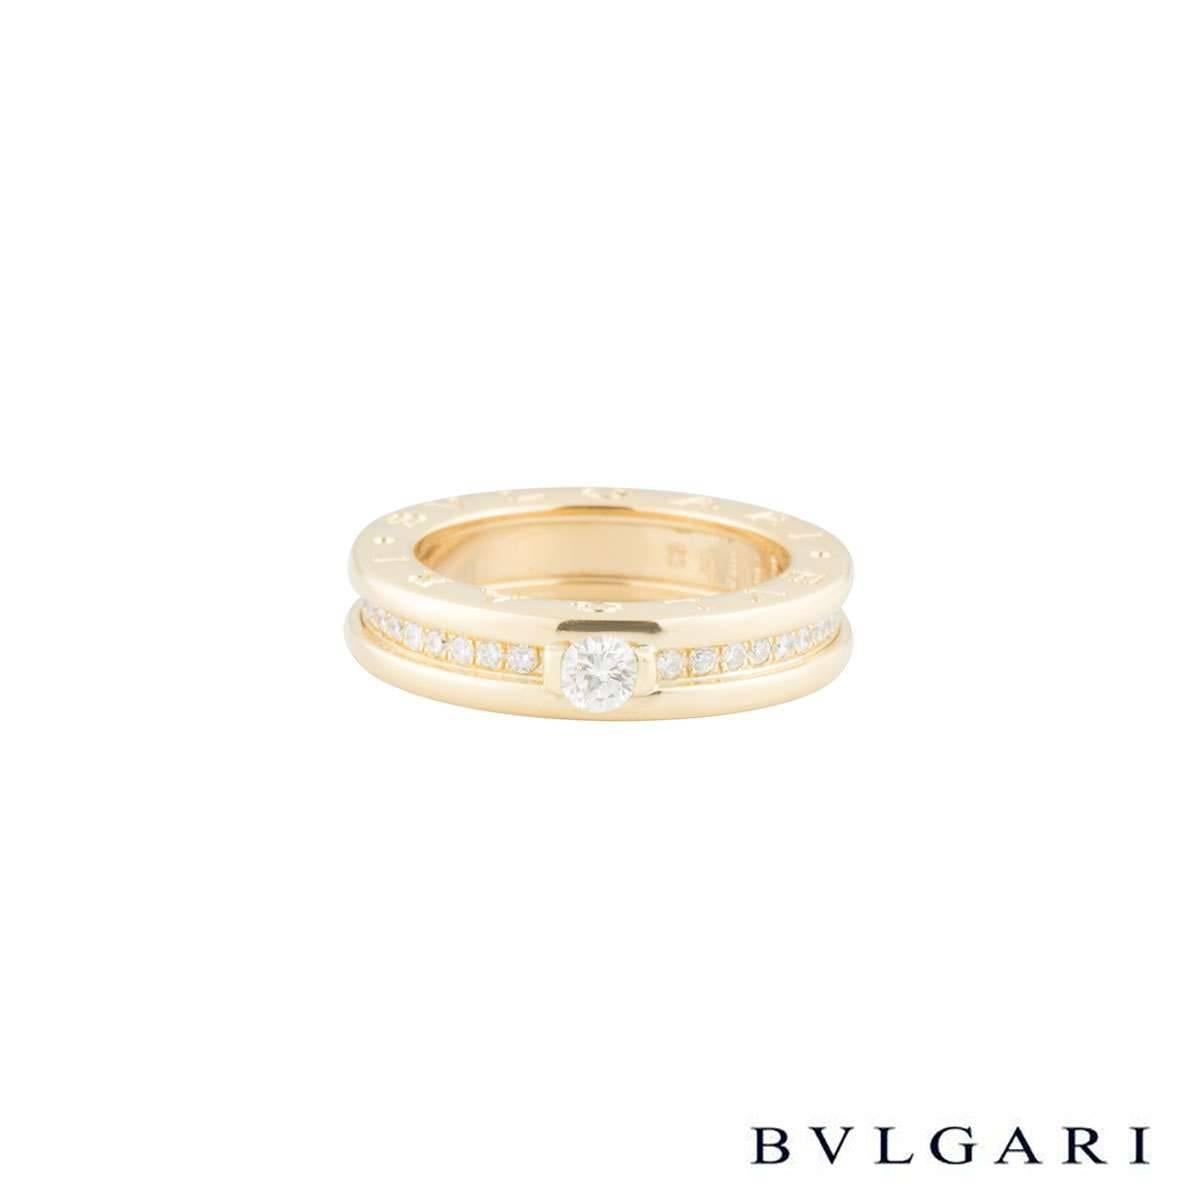 An 18k yellow gold diamond set Bvlgari ring from the B.Zero1 collection. Set to the centre of the ring is a 0.30ct round brilliant cut diamond in a rubover setting, F in colour and VVS2 in clarity. Accentuating the central stone on either side are